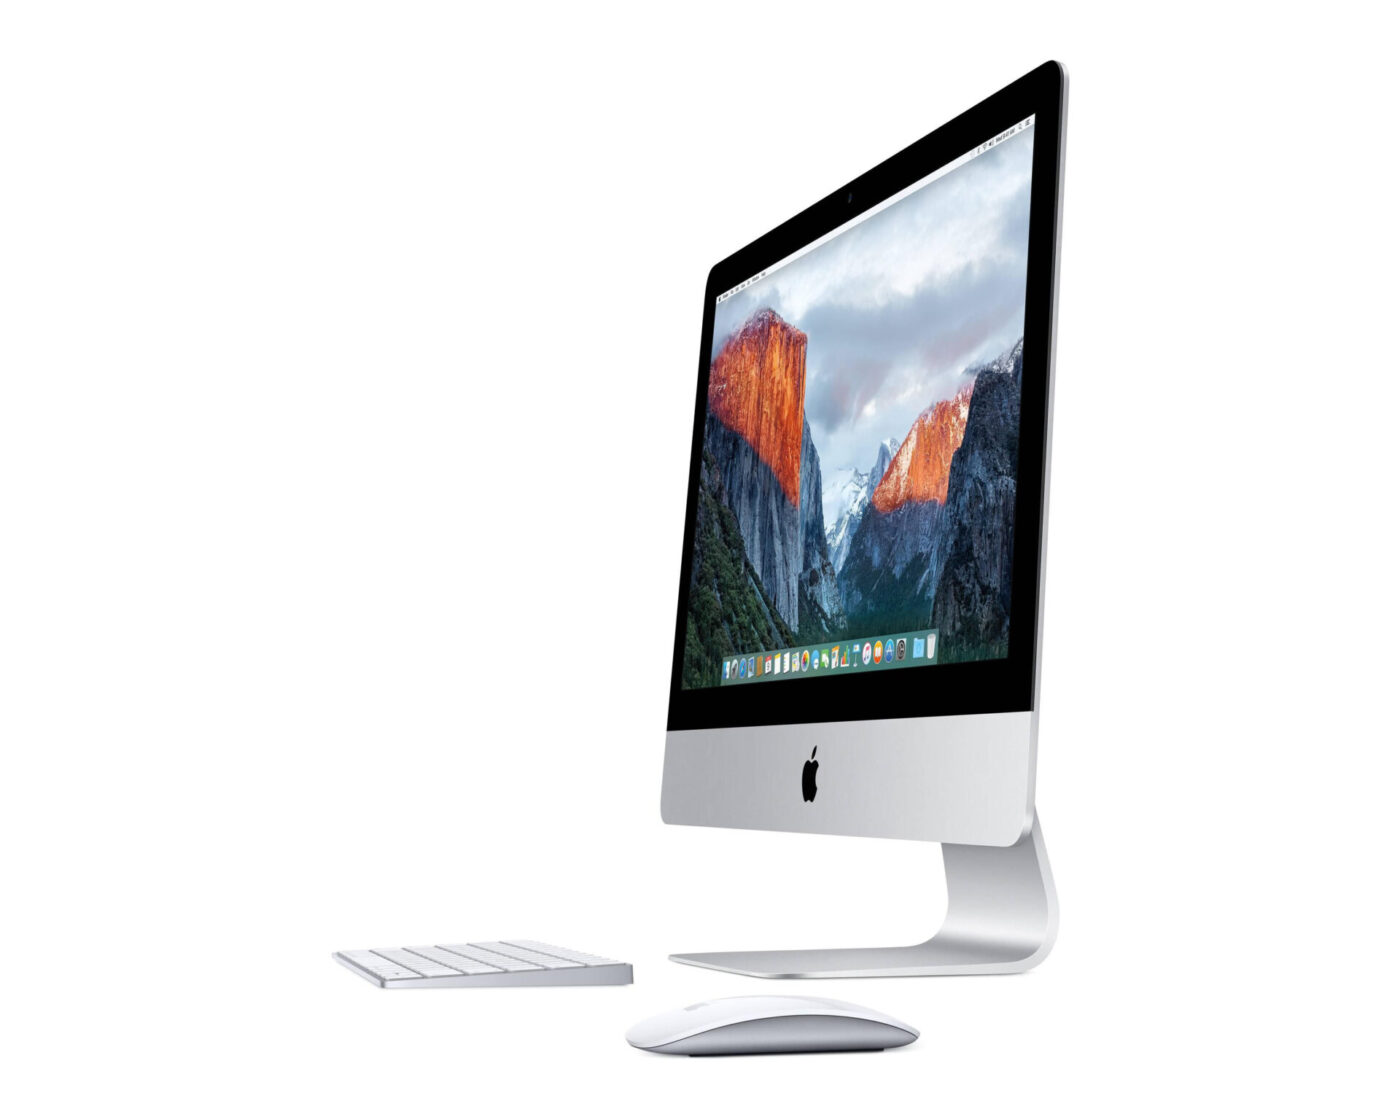 iMac Retina 21.5-inch Late 2015 – Tech Specs, Release Date, and Price